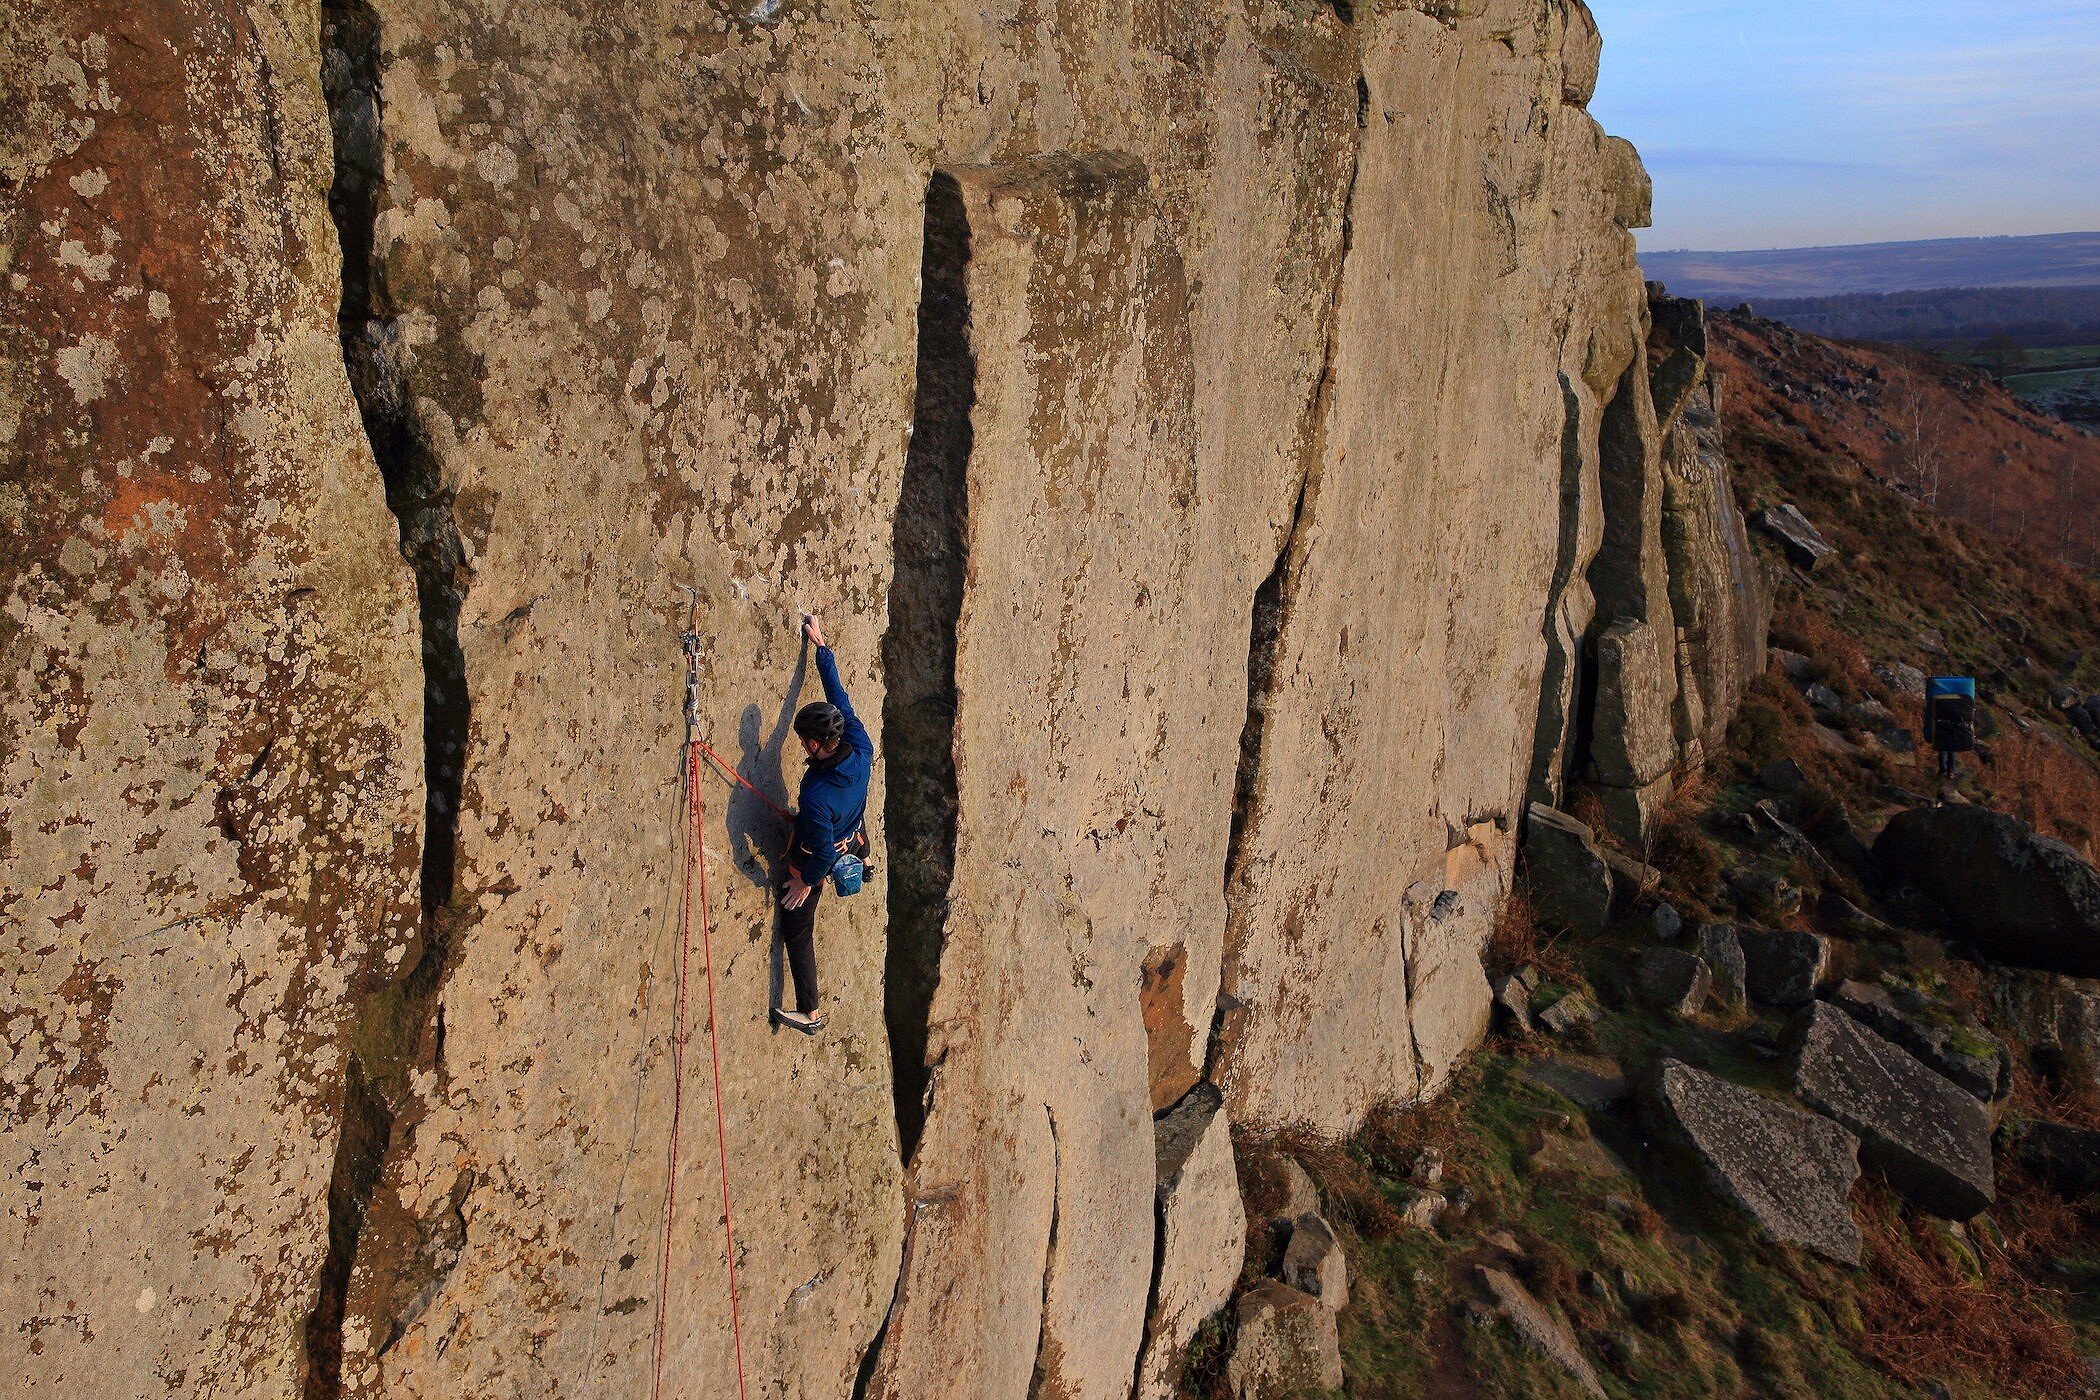 Joe Mullett takes a moment before heading out across the cold sharp crimps  © Mike Hutton